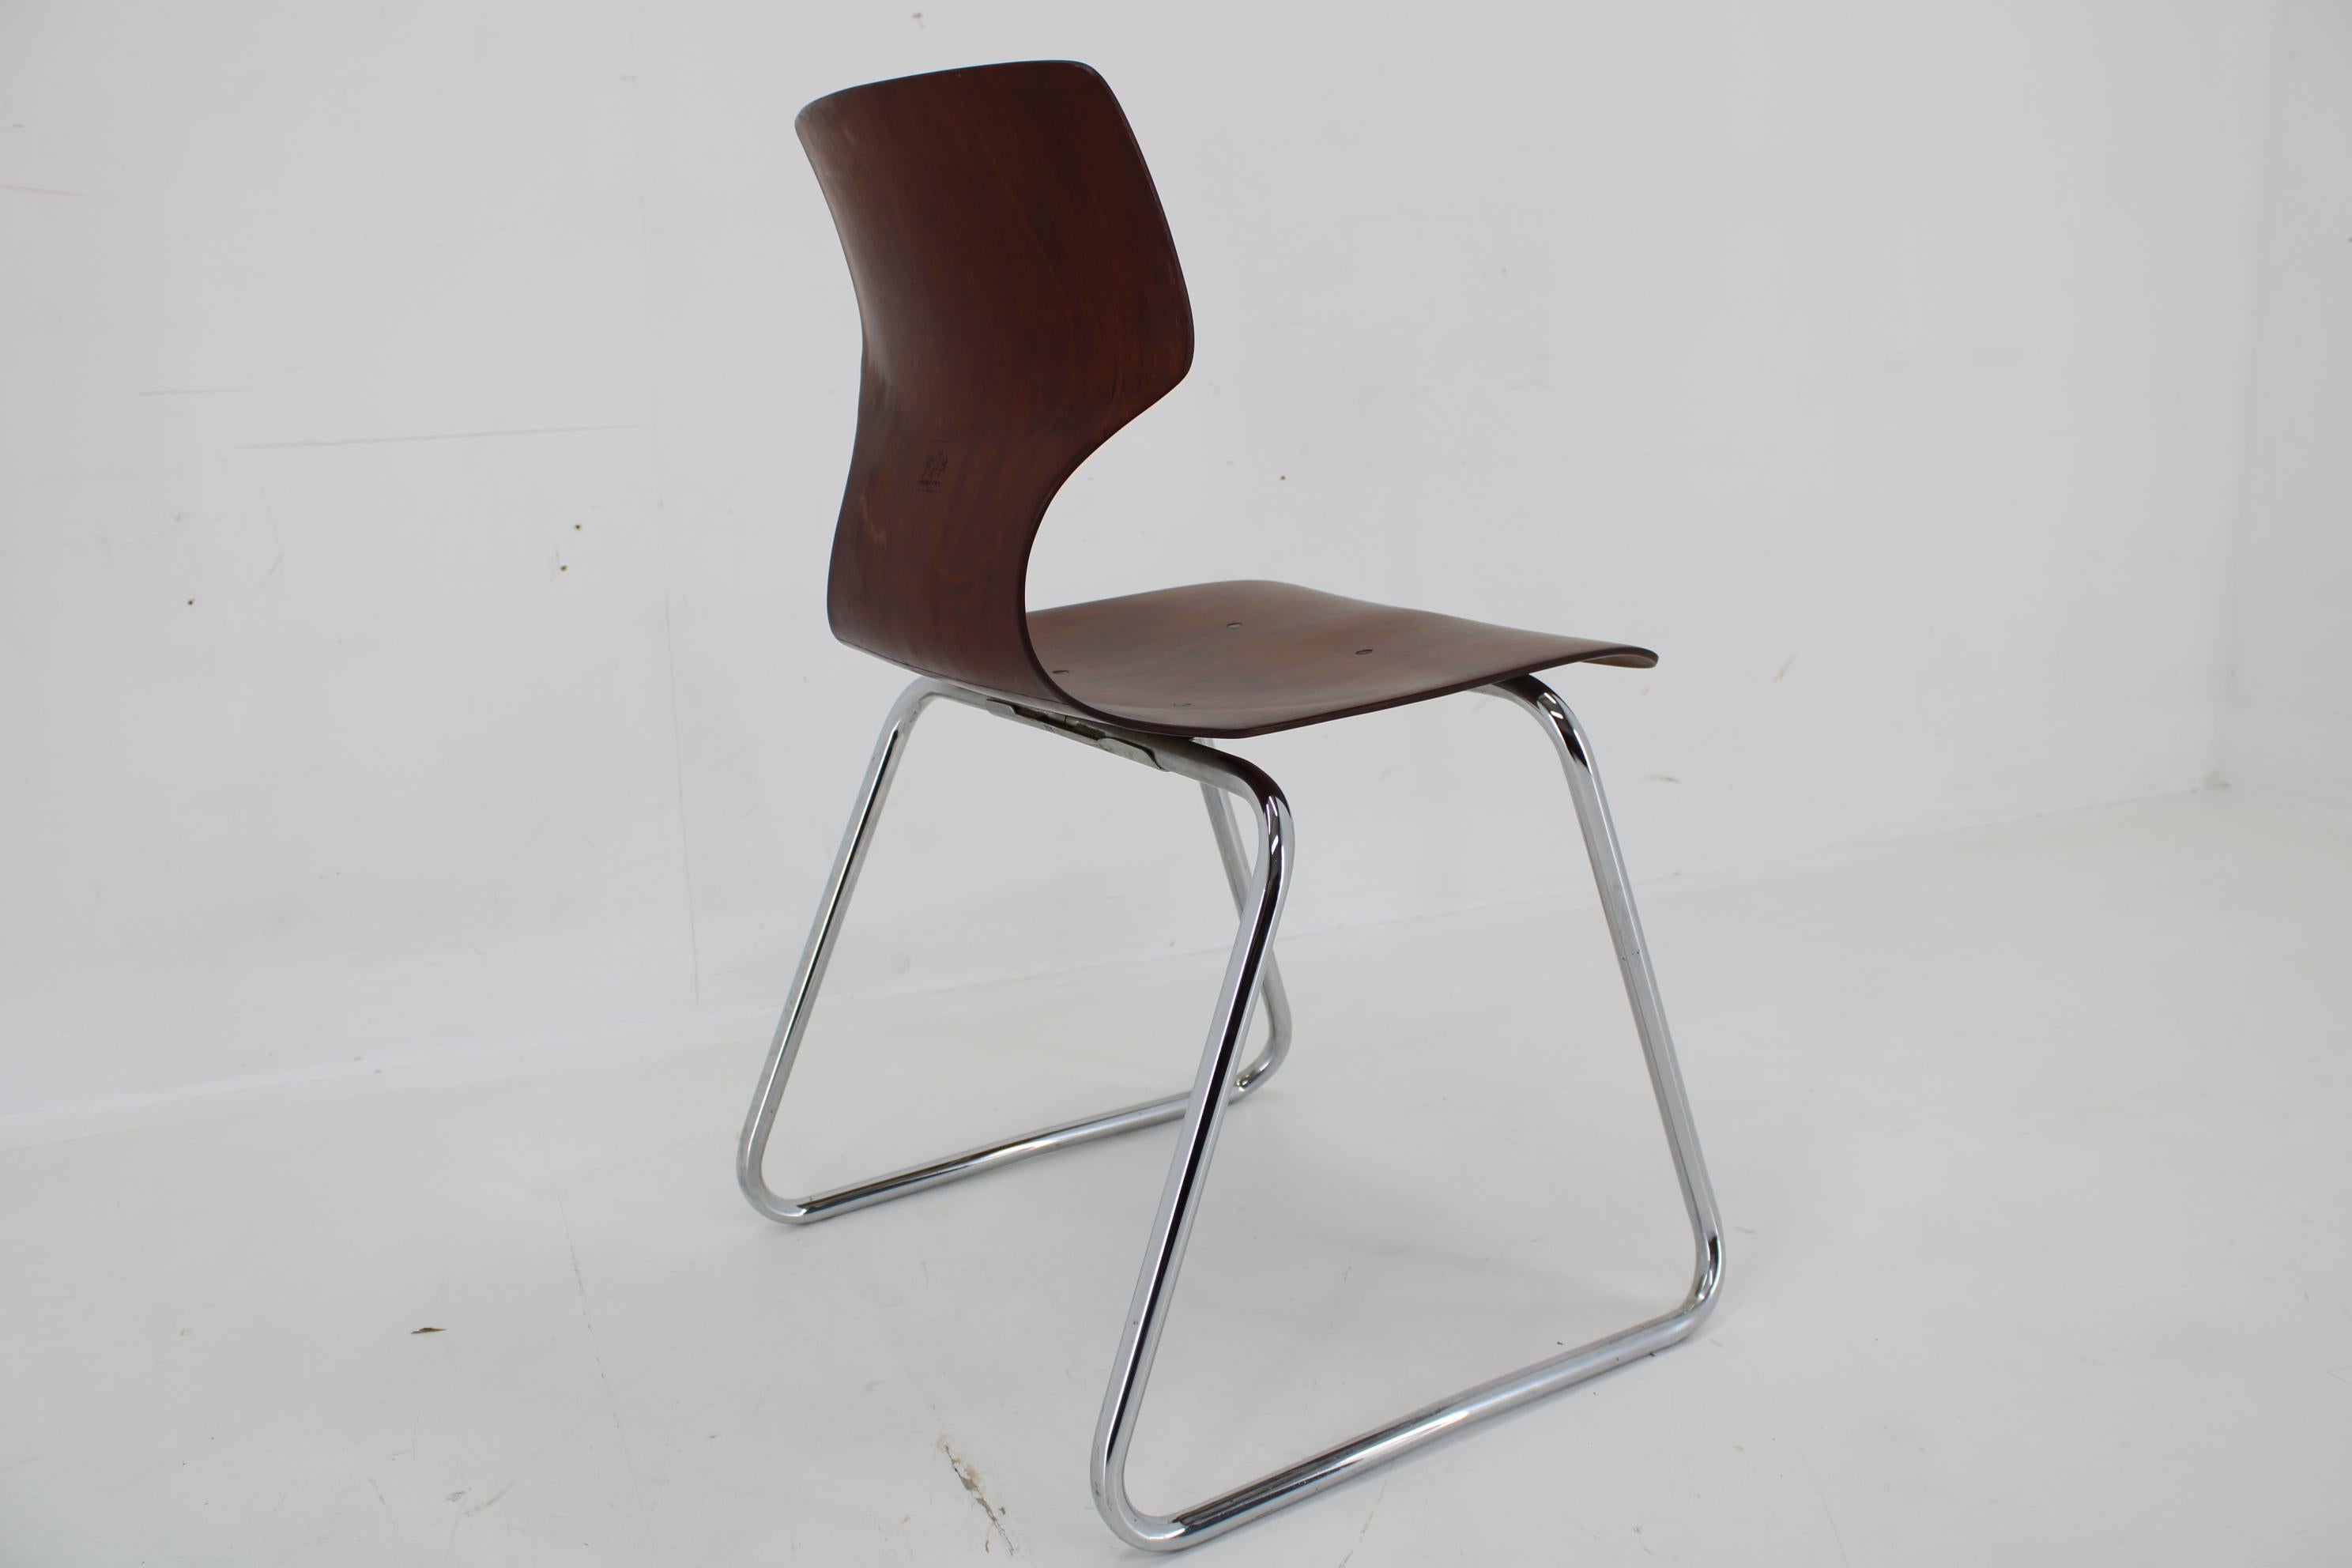 1970s Elmar Flototto Dining or Side Chair, Germany -40 Pieces Available For Sale 4